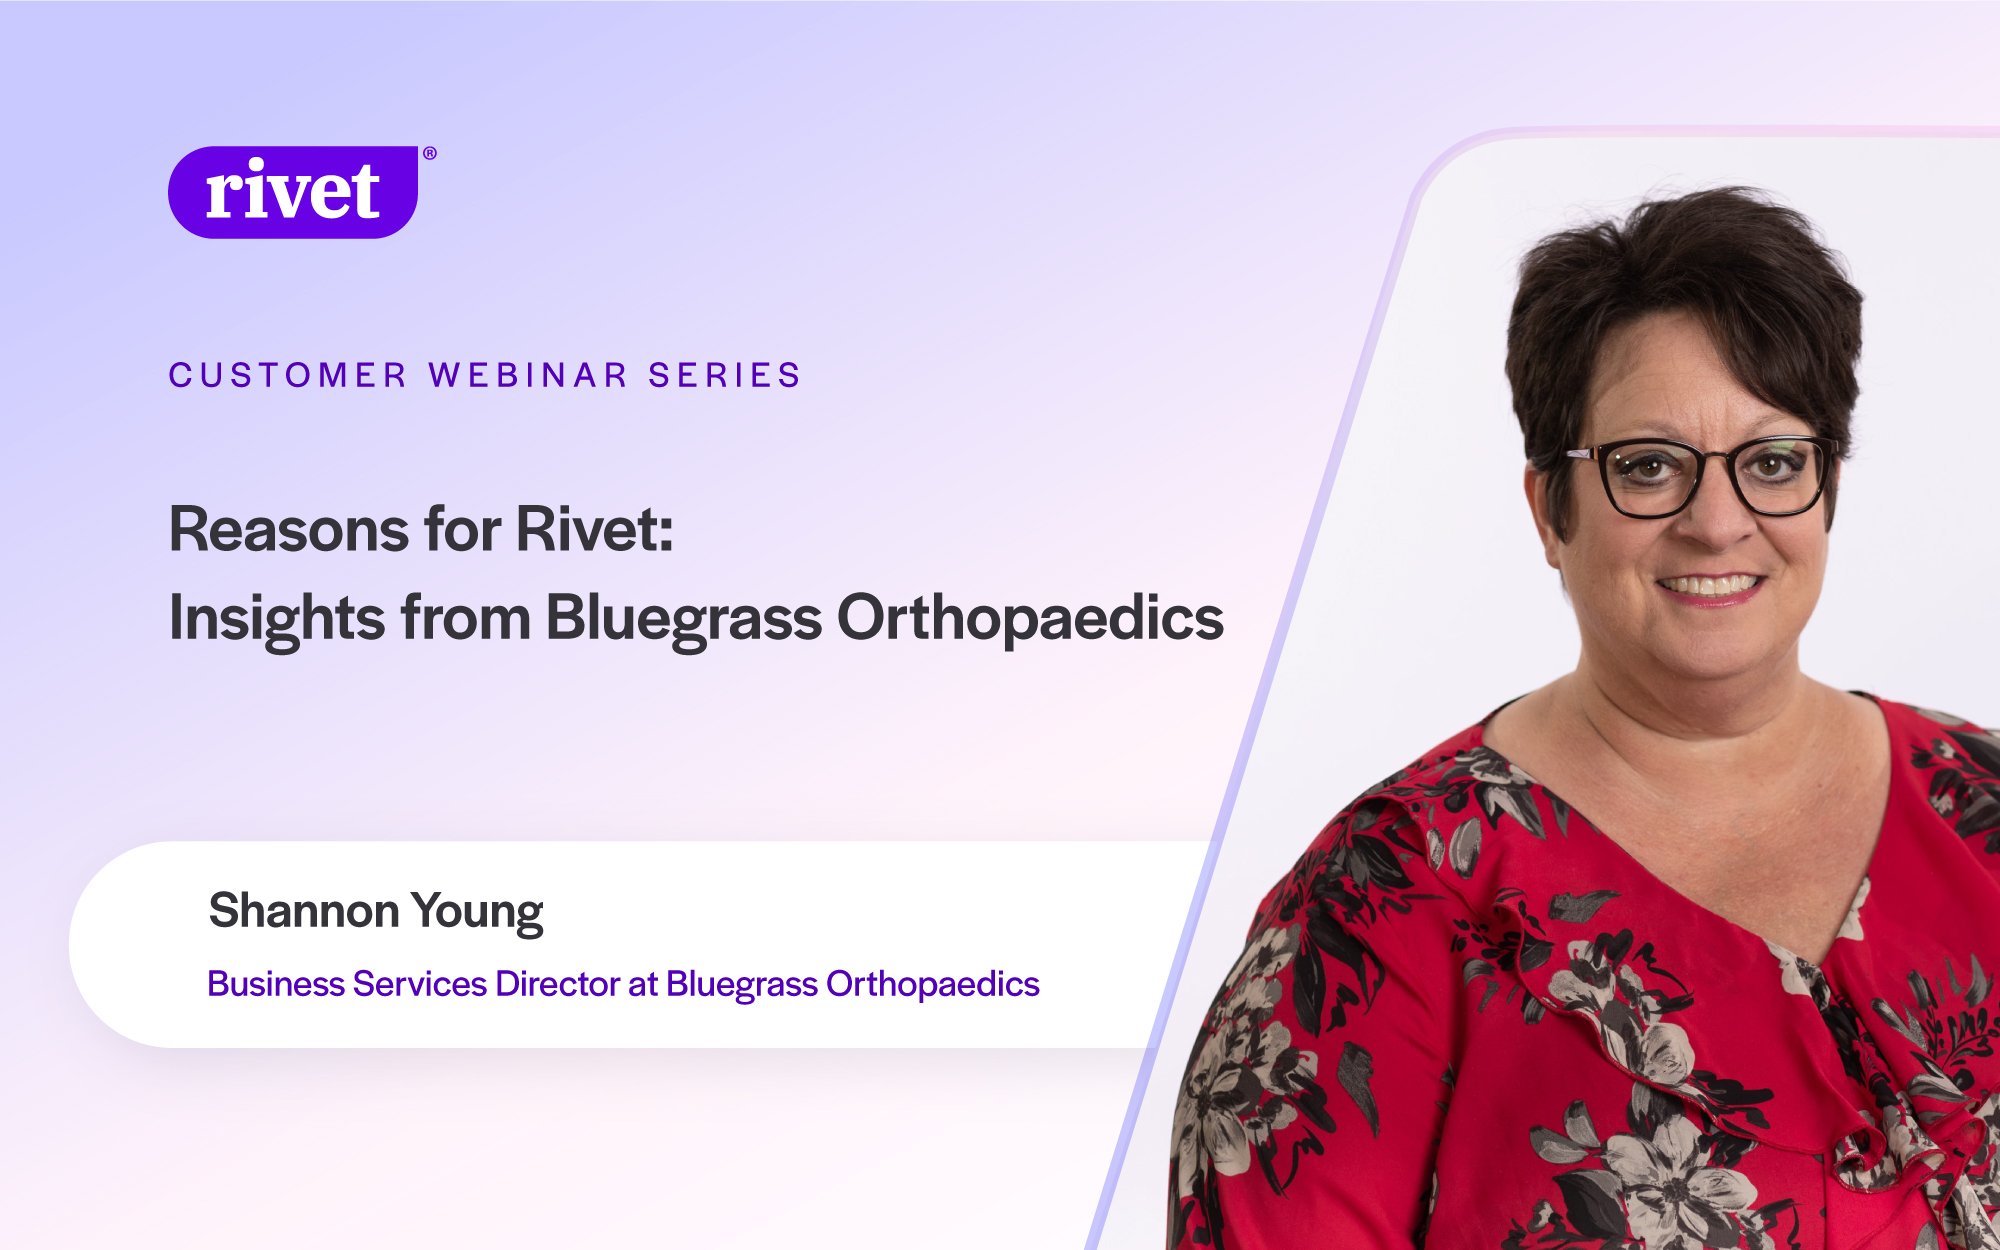 Reasons for Rivet: Insights from Bluegrass Orthopaedics